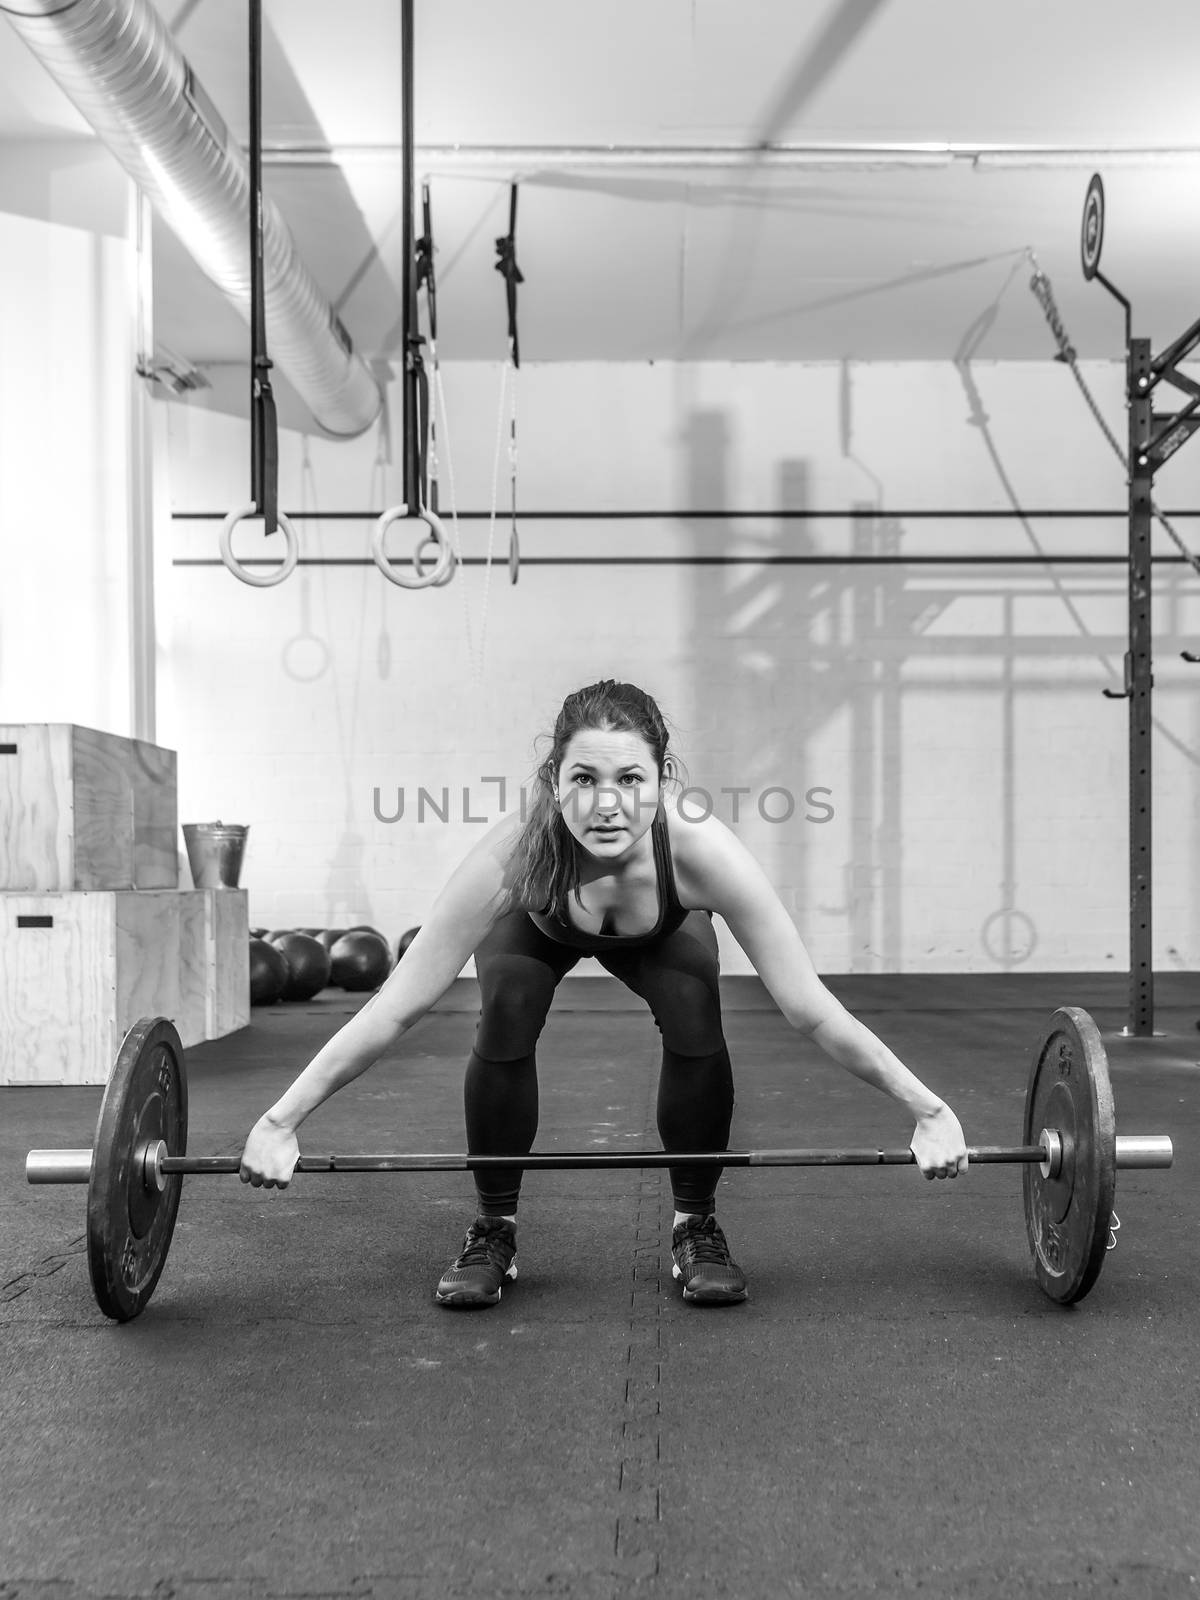 Photo of a young woman at a crossfit gym lifting a barbell.